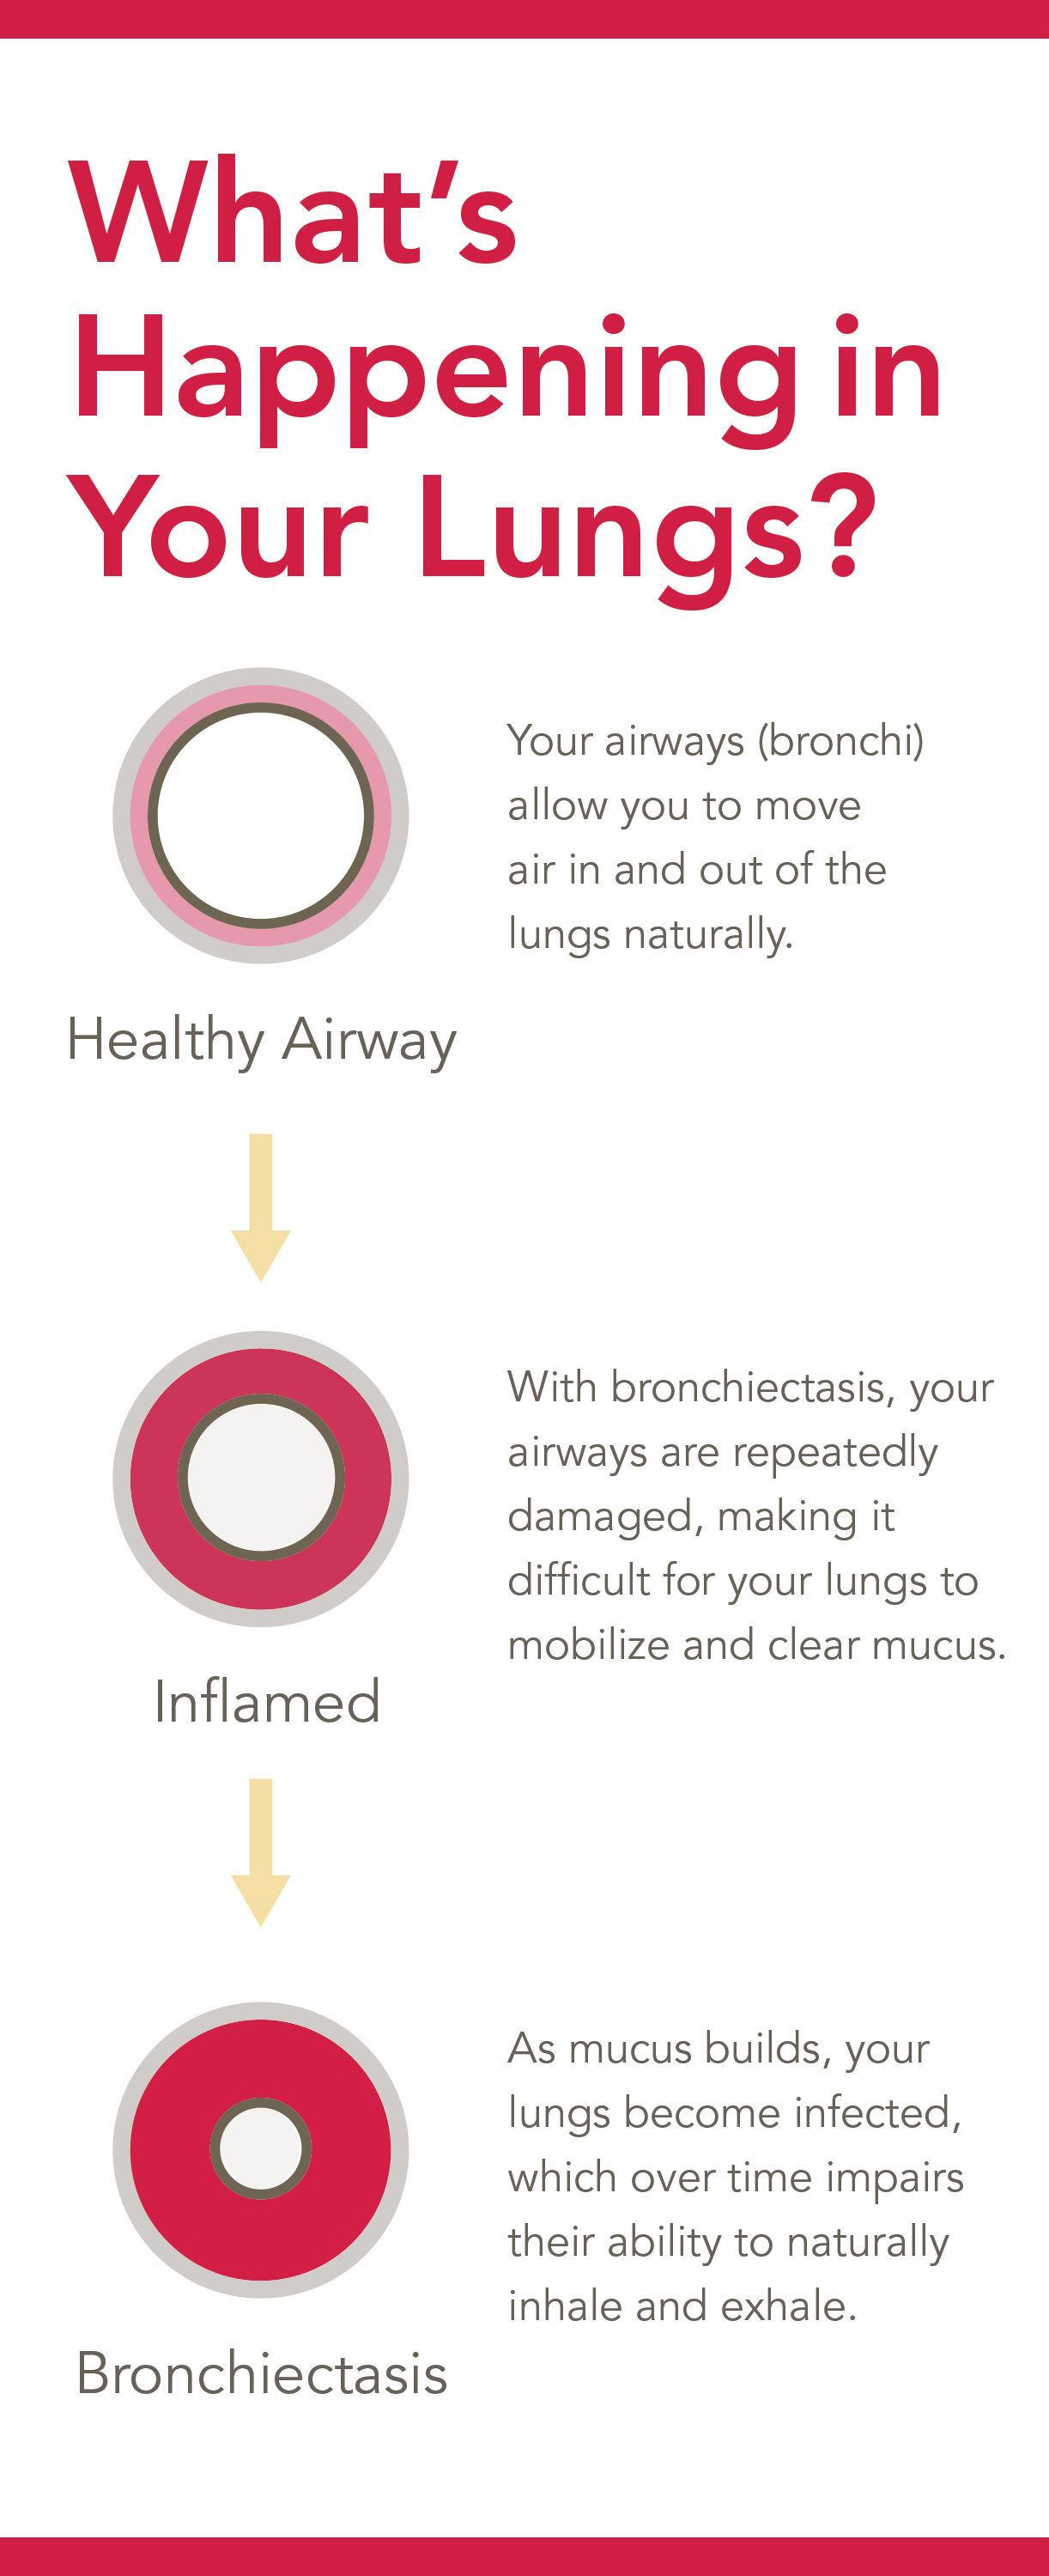 What's happening in your lungs?